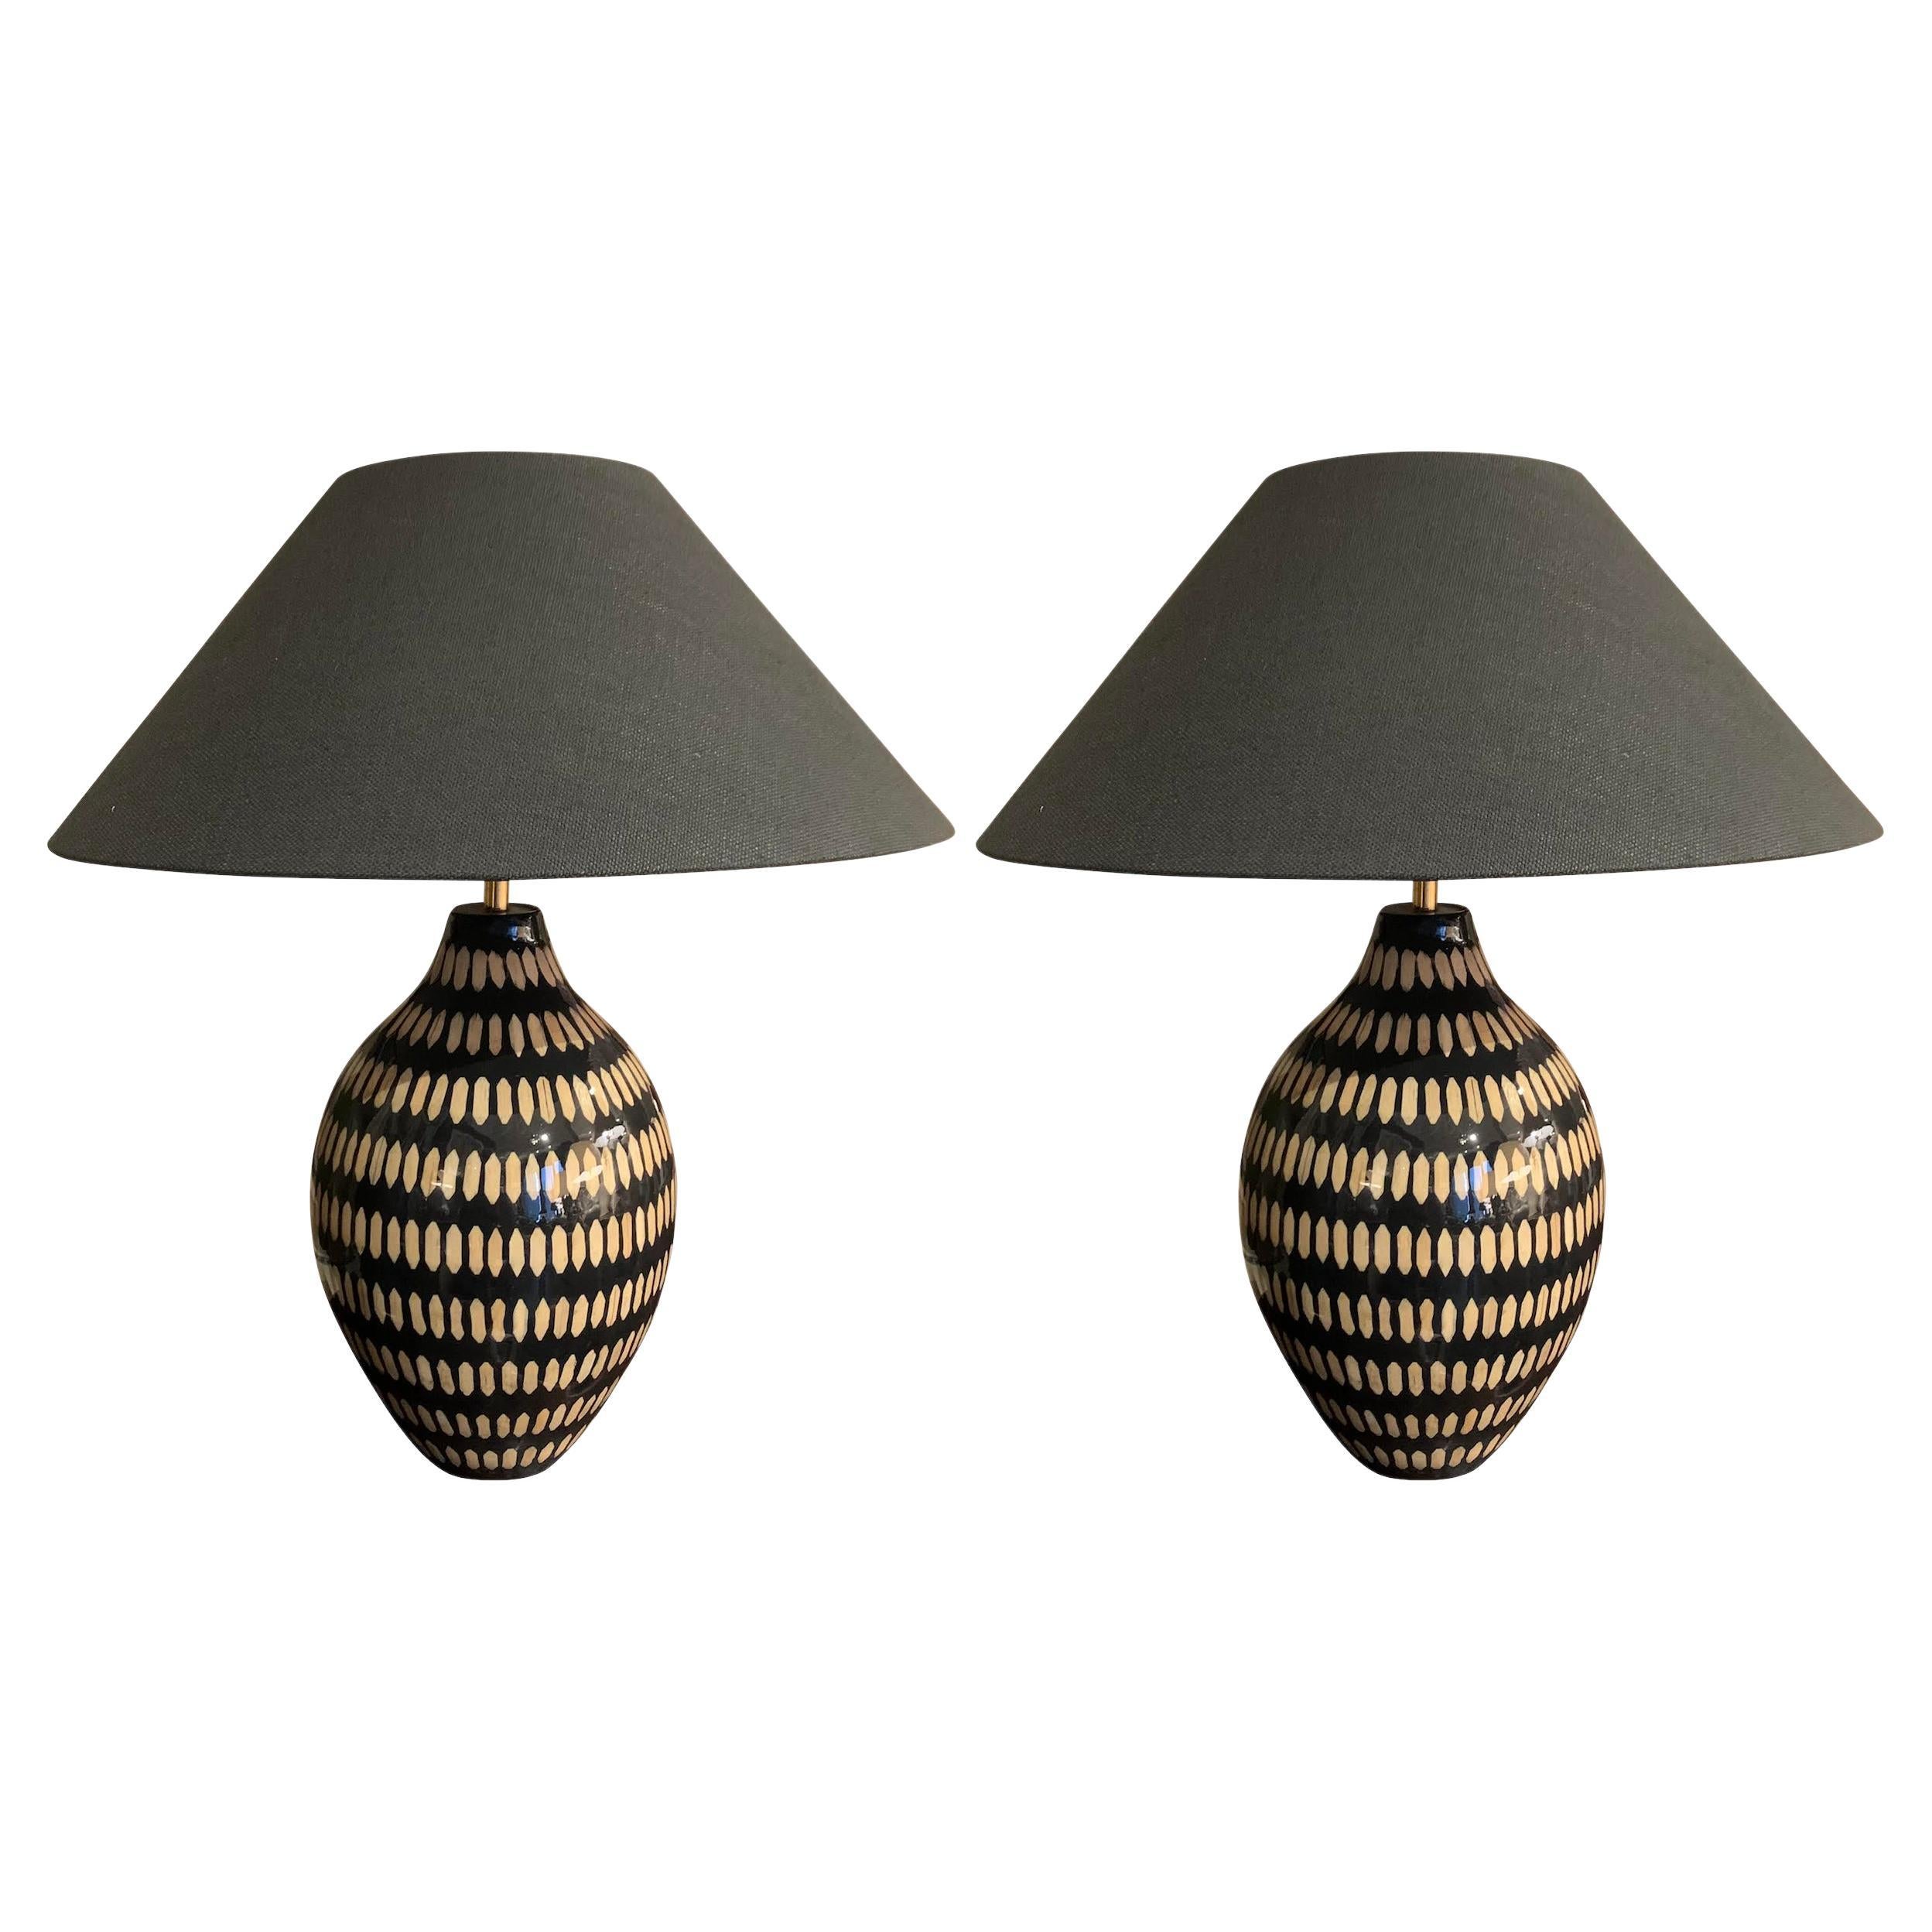 Black With Cream Lacquered Bamboo Pair Table Lamps, China, Contemporary For Sale